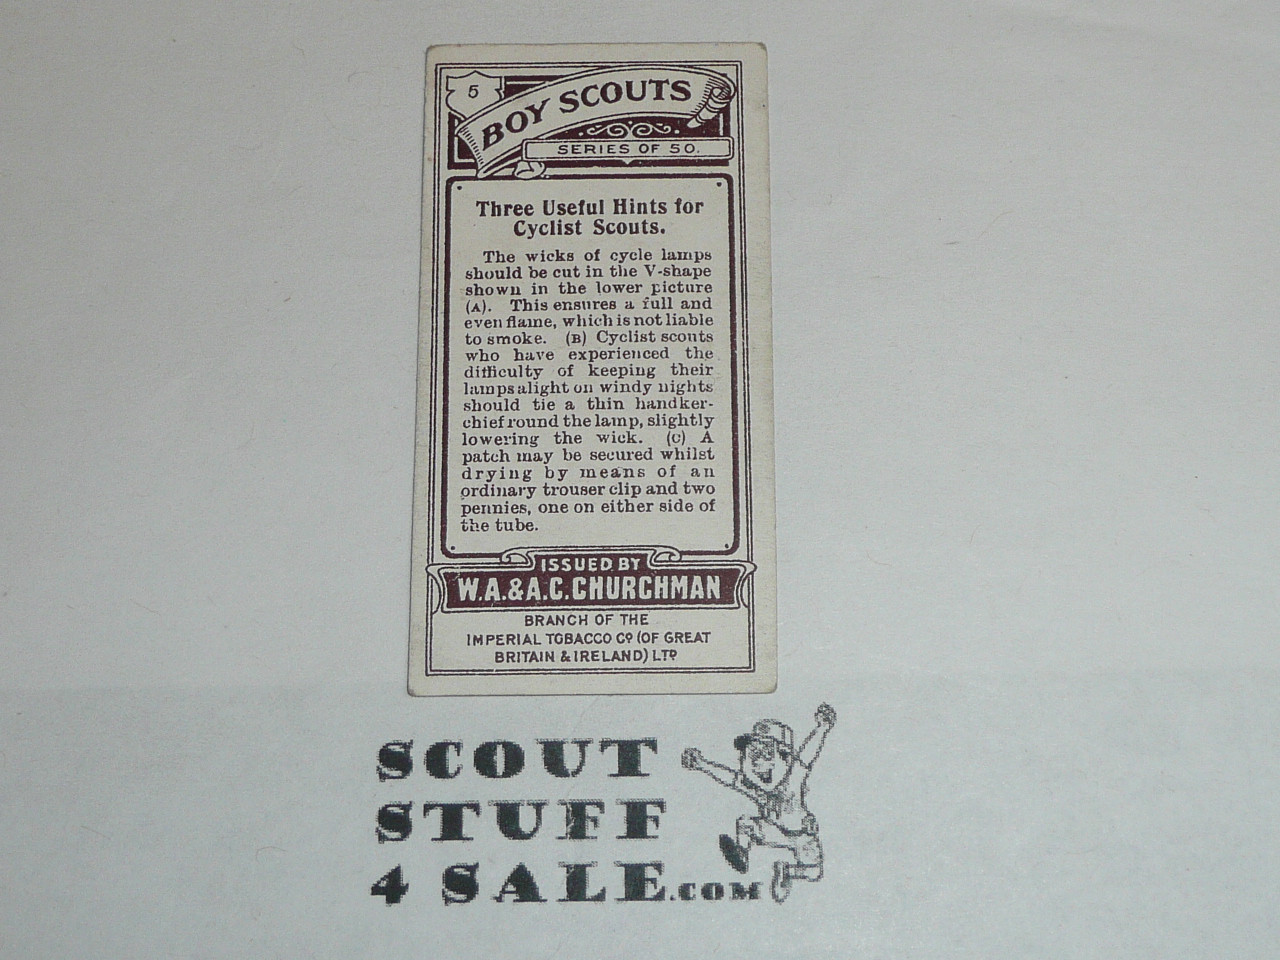 Churchman Cigarette Company Premium Card, Boy Scout Series of 50, Card #5 Three Useful Hints for Cyclist Scouts, 1916